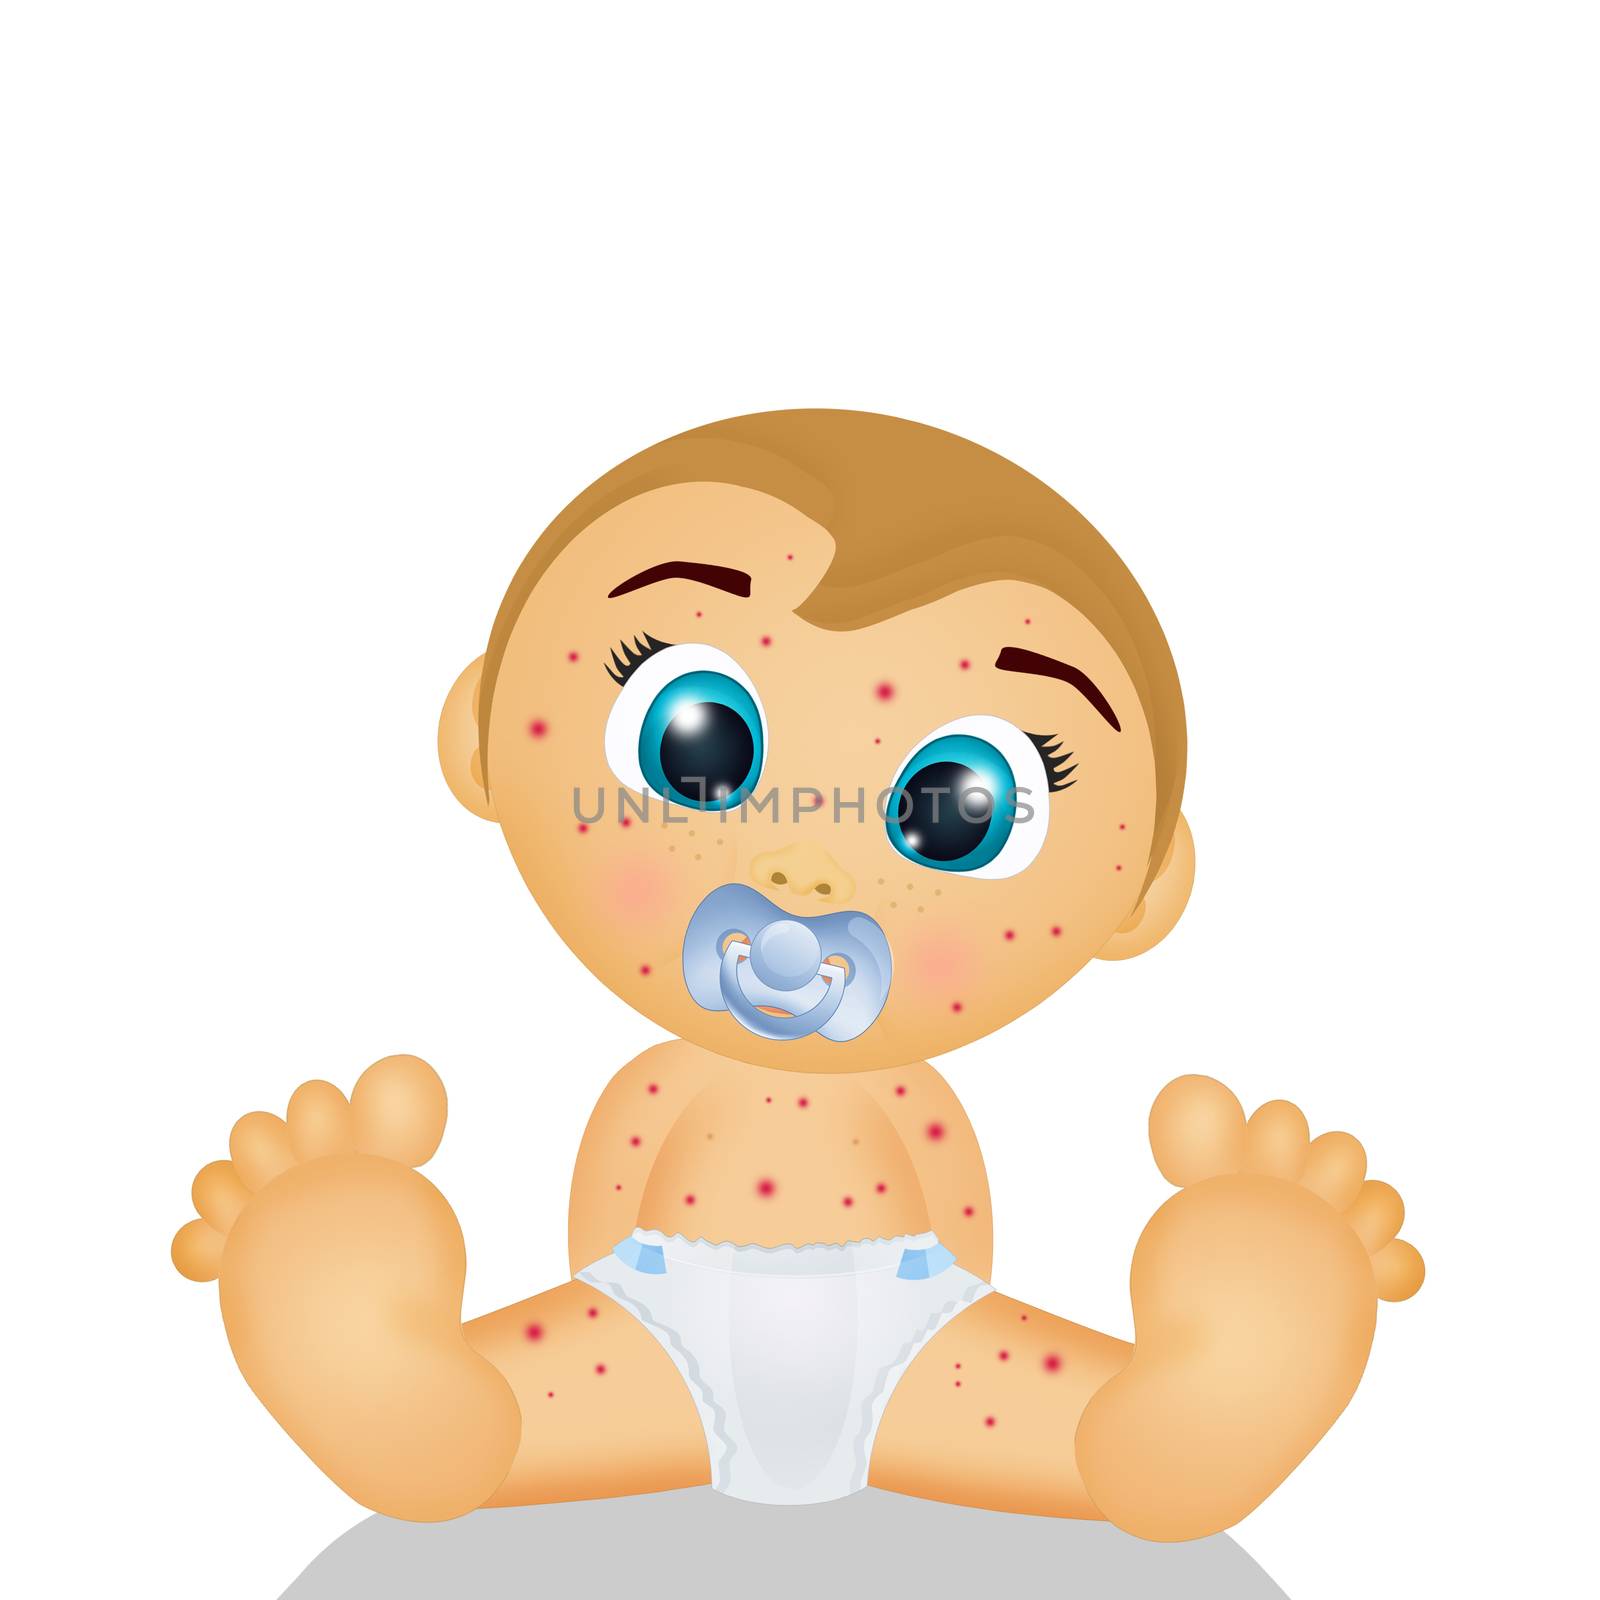 illustration of baby with chicken pox